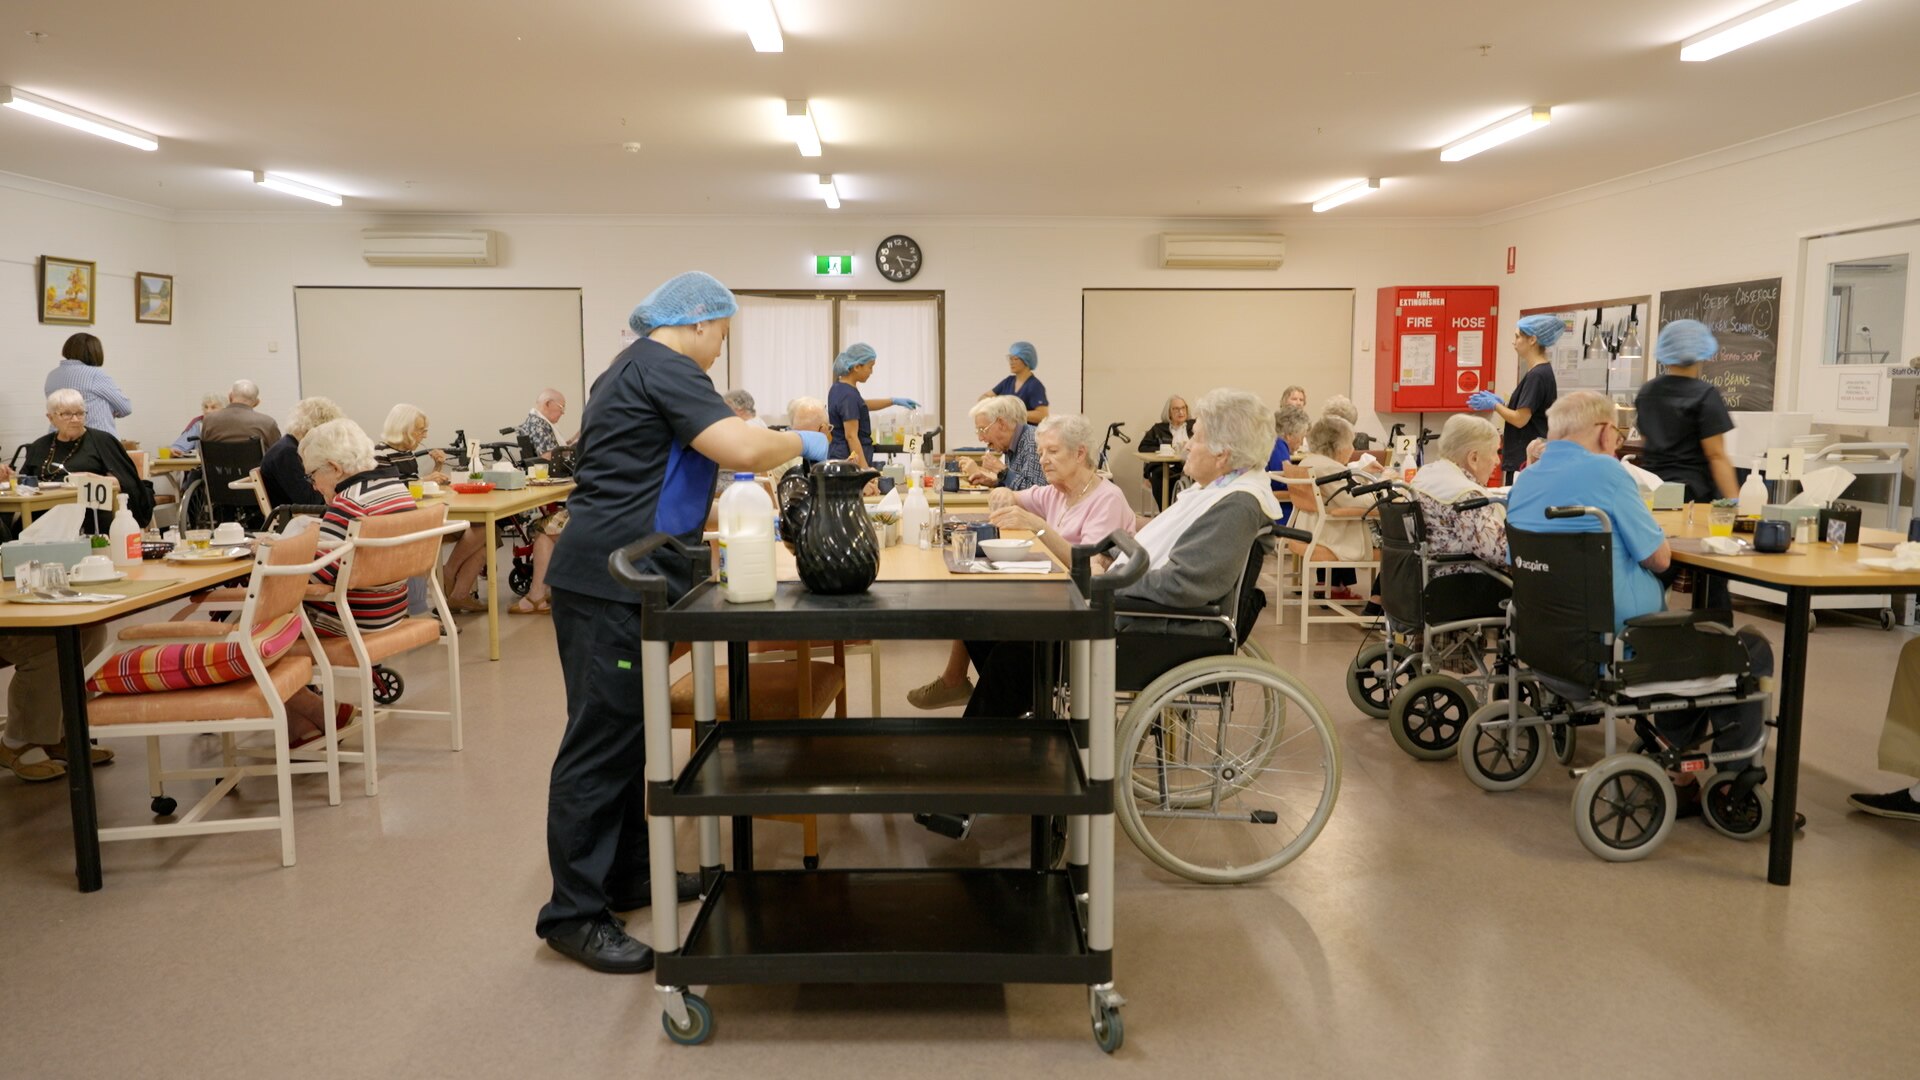 A dining room at an aged care facility with workers in blue hair nets helping serve food to residents